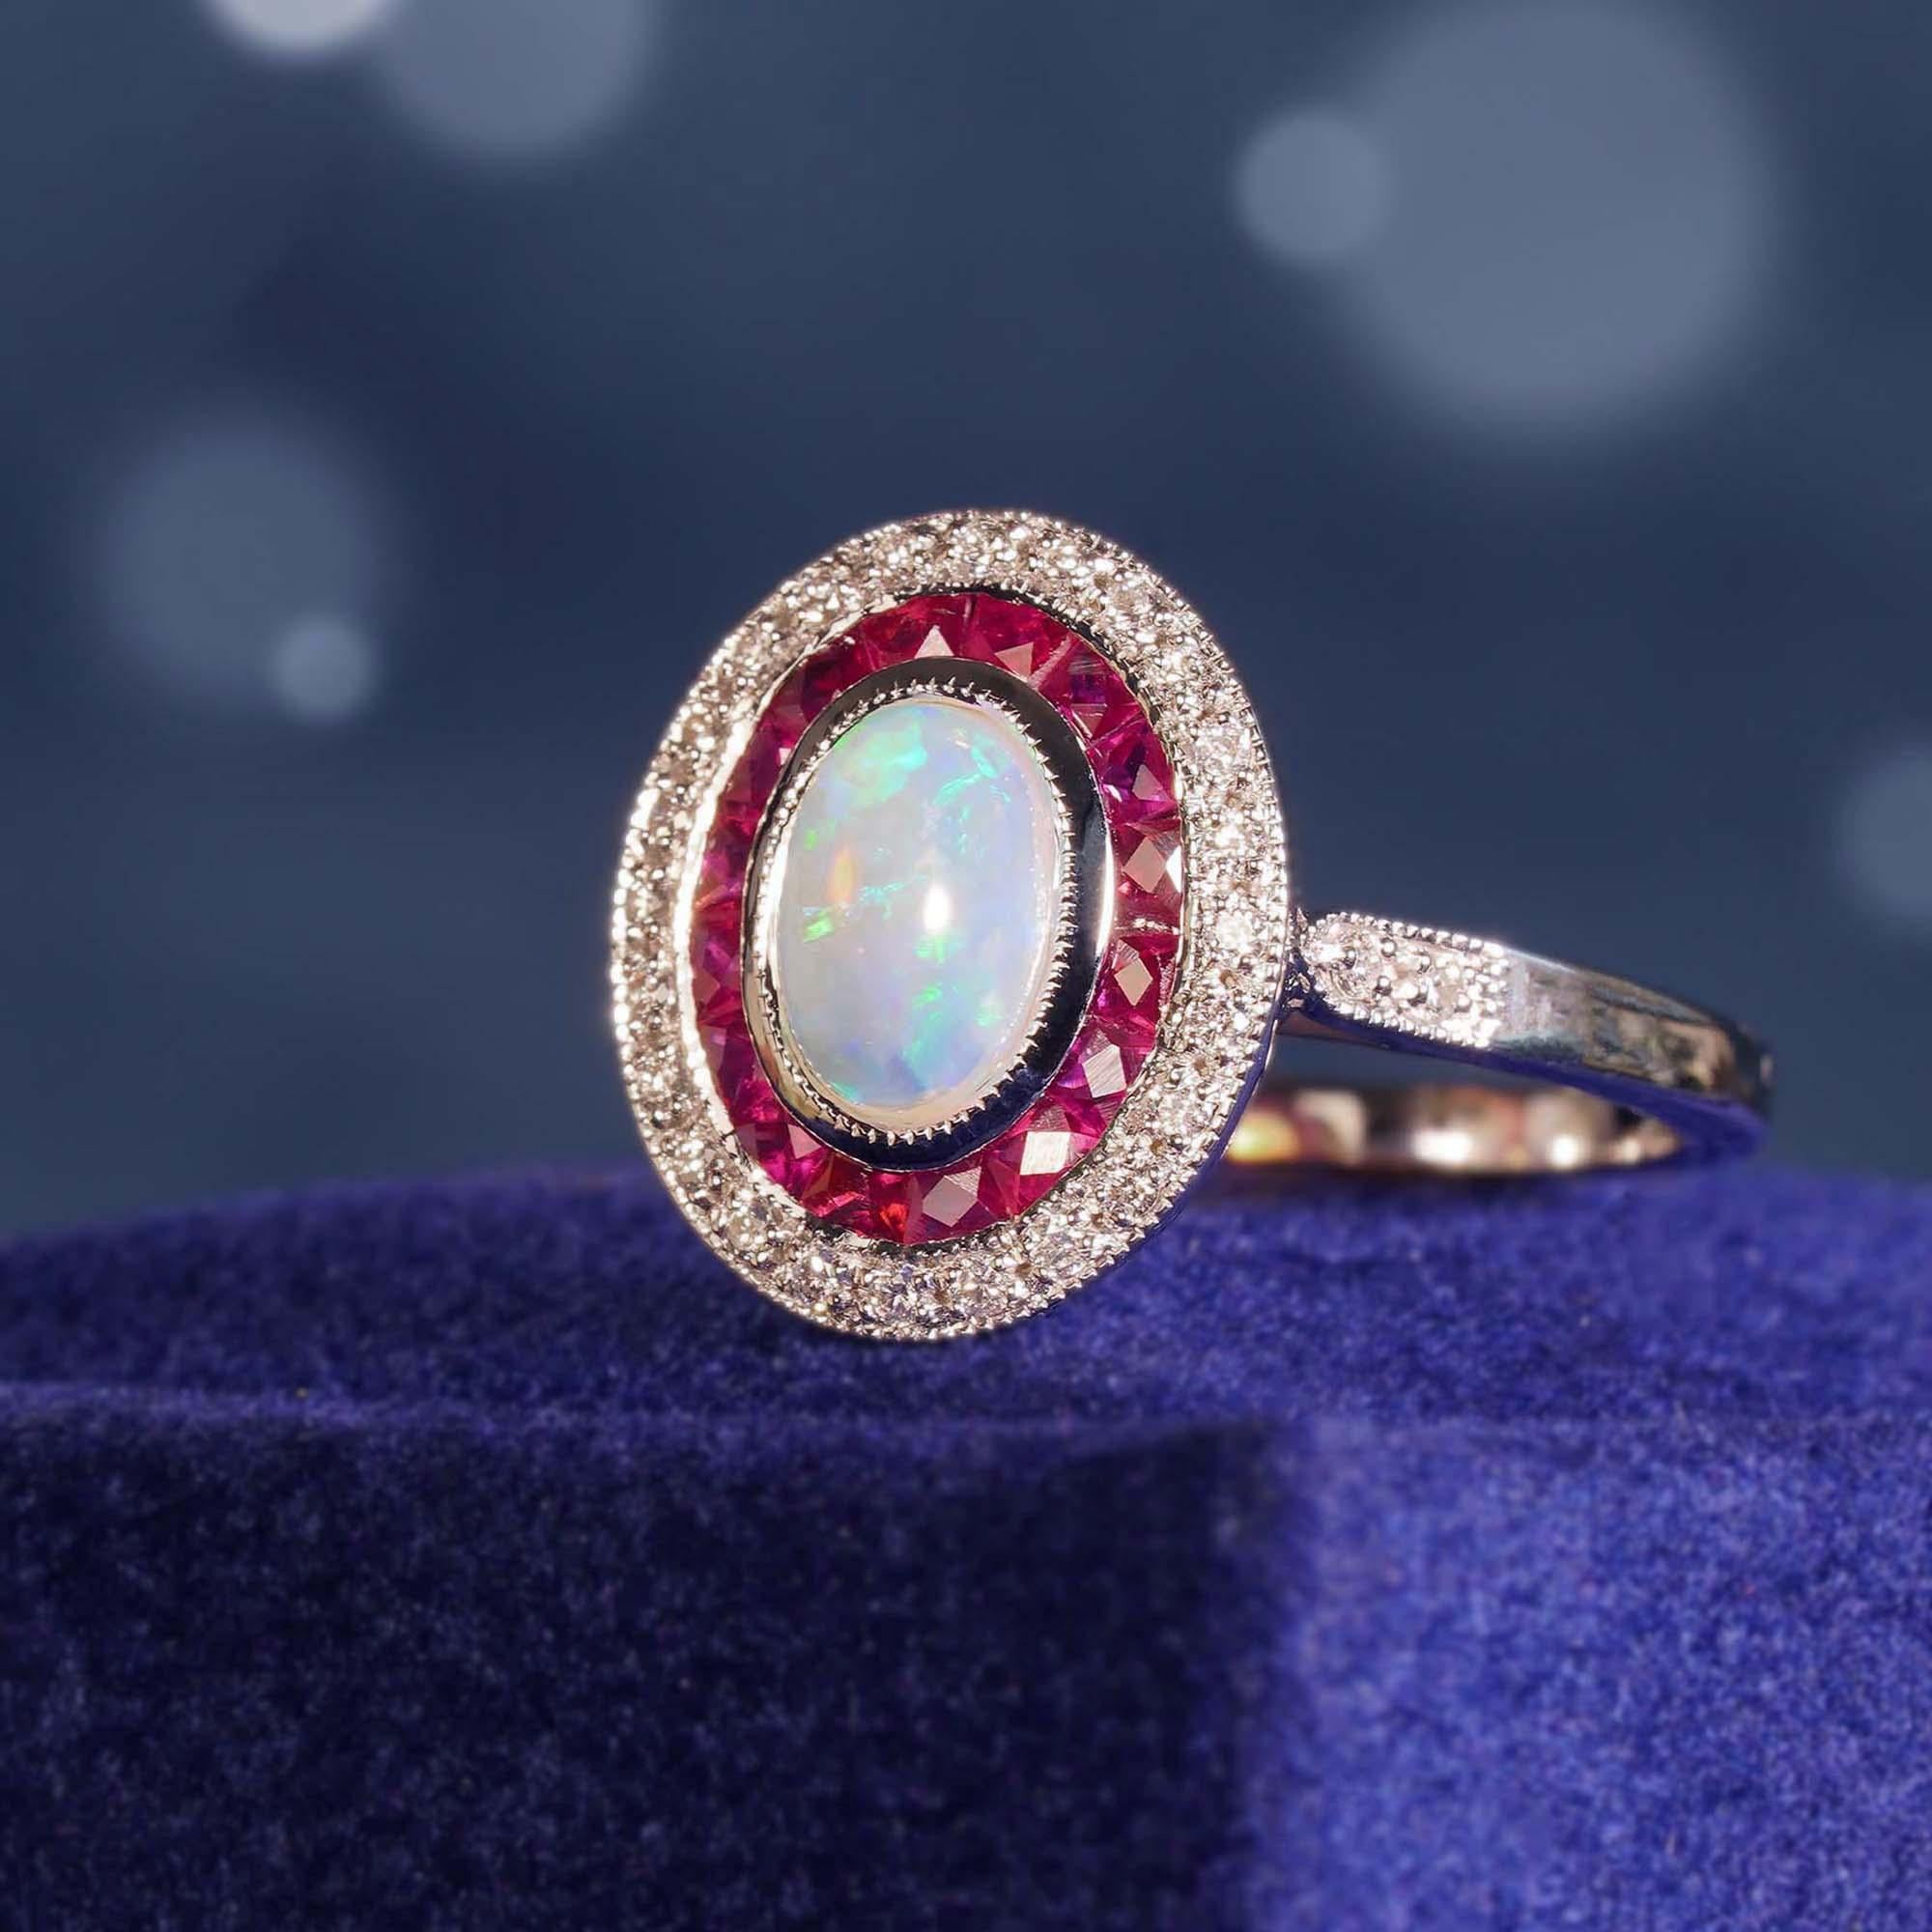 An Art Deco style target design ring made with 14k white gold. The center is a 0.45 carat oval cut of play-of-color opal. It is surrounded by custom cut rubies that are cut by hand to fit seamlessly together. The rubies are further enhanced by a row